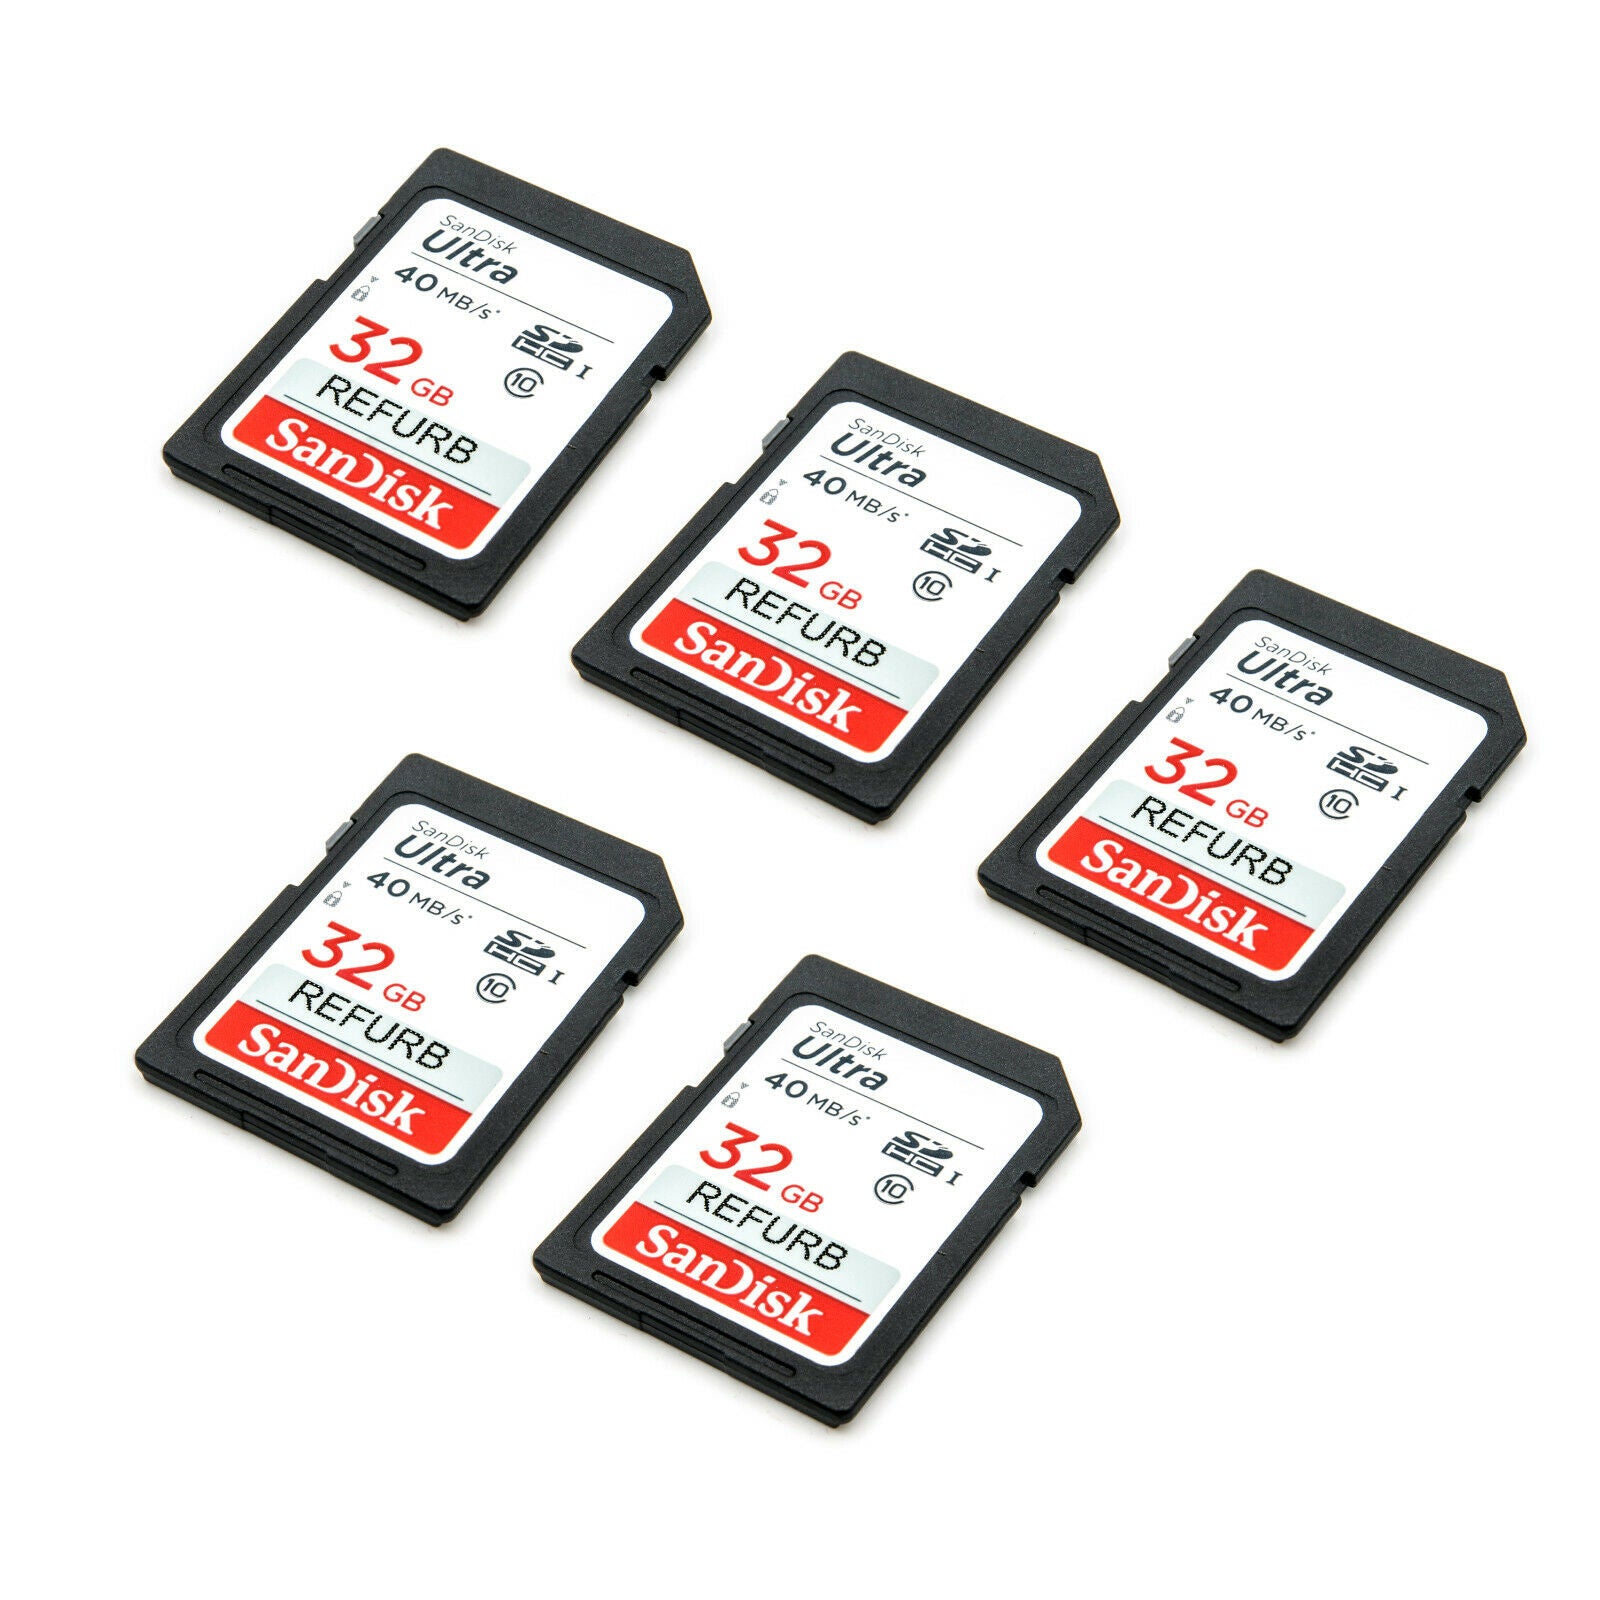 SanDisk 32GB Ultra Plus 10 UHS-I SD 80MBs SDHC/SDXC Memory Card (Re-certified)